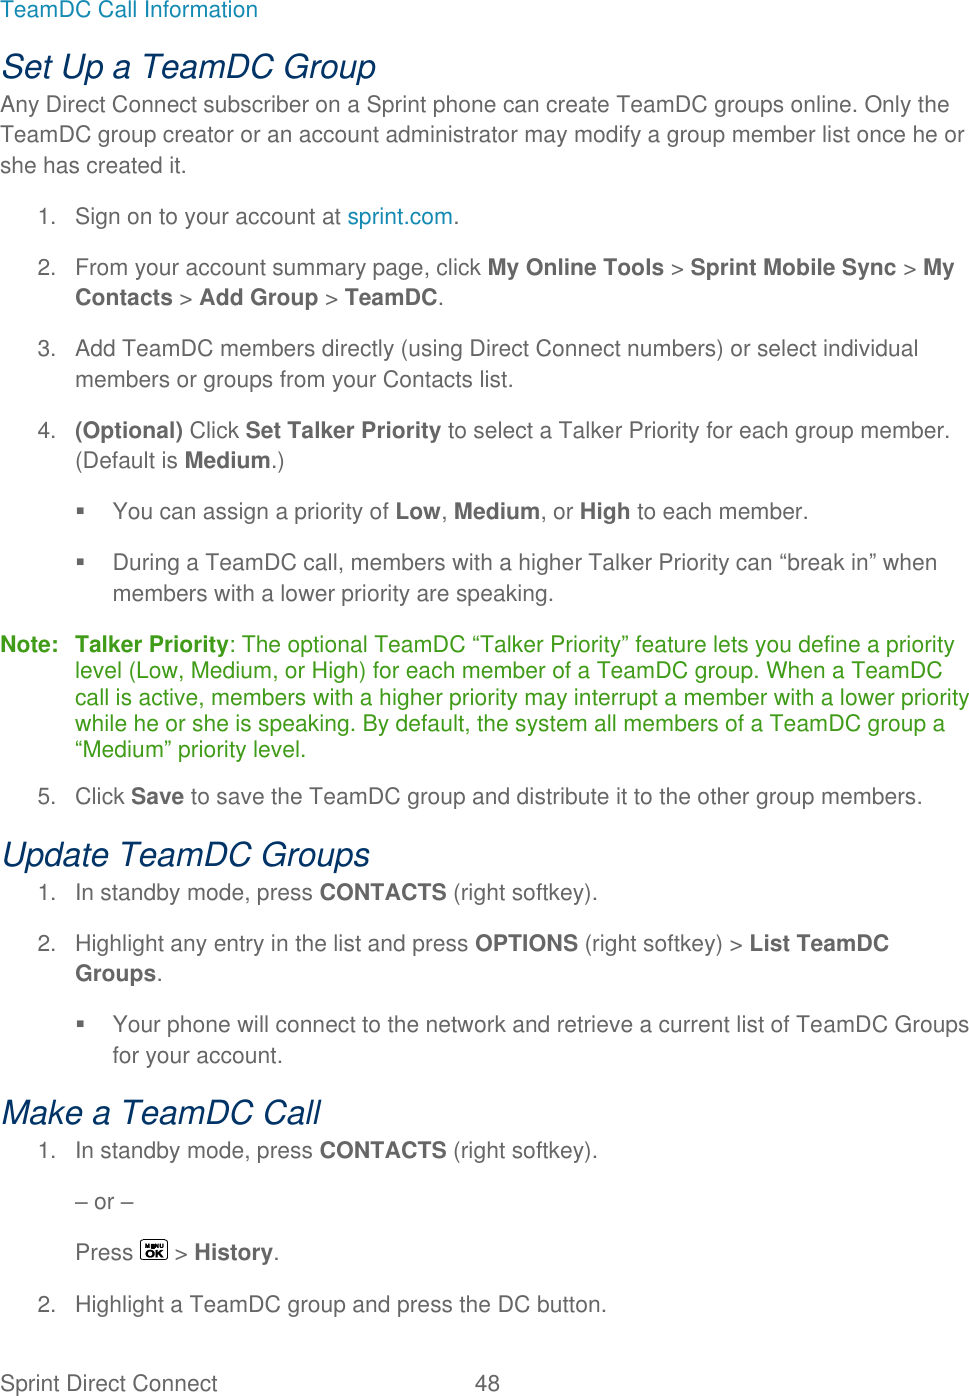  Sprint Direct Connect  48   TeamDC Call Information Set Up a TeamDC Group Any Direct Connect subscriber on a Sprint phone can create TeamDC groups online. Only the TeamDC group creator or an account administrator may modify a group member list once he or she has created it. 1.  Sign on to your account at sprint.com. 2.  From your account summary page, click My Online Tools &gt; Sprint Mobile Sync &gt; My Contacts &gt; Add Group &gt; TeamDC. 3.  Add TeamDC members directly (using Direct Connect numbers) or select individual members or groups from your Contacts list. 4. (Optional) Click Set Talker Priority to select a Talker Priority for each group member. (Default is Medium.)   You can assign a priority of Low, Medium, or High to each member.   During a TeamDC call, members with a higher Talker Priority can ―break in‖ when members with a lower priority are speaking. Note: Talker Priority: The optional TeamDC ―Talker Priority‖ feature lets you define a priority level (Low, Medium, or High) for each member of a TeamDC group. When a TeamDC call is active, members with a higher priority may interrupt a member with a lower priority while he or she is speaking. By default, the system all members of a TeamDC group a ―Medium‖ priority level. 5.  Click Save to save the TeamDC group and distribute it to the other group members. Update TeamDC Groups 1.  In standby mode, press CONTACTS (right softkey). 2.  Highlight any entry in the list and press OPTIONS (right softkey) &gt; List TeamDC Groups.   Your phone will connect to the network and retrieve a current list of TeamDC Groups for your account. Make a TeamDC Call 1.  In standby mode, press CONTACTS (right softkey). – or – Press   &gt; History. 2.  Highlight a TeamDC group and press the DC button. 